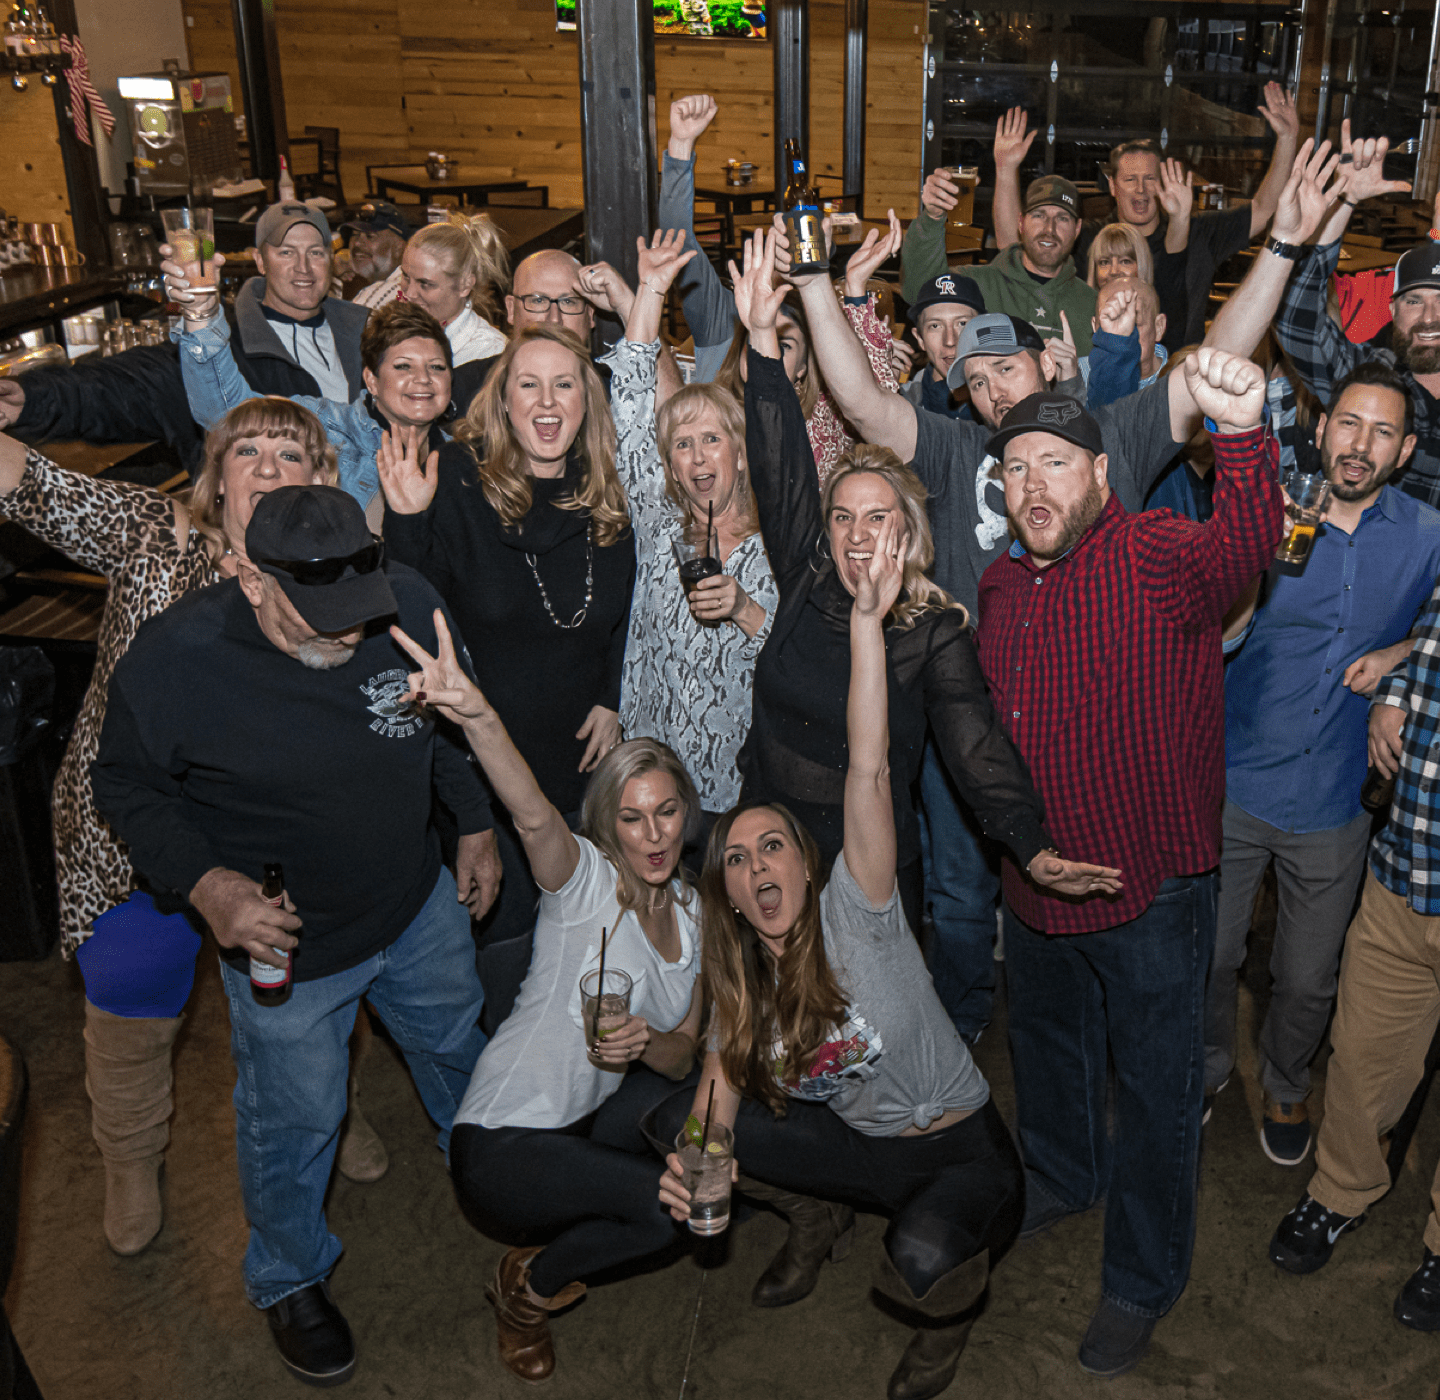 Guests celebrating at Wide Open Saloon